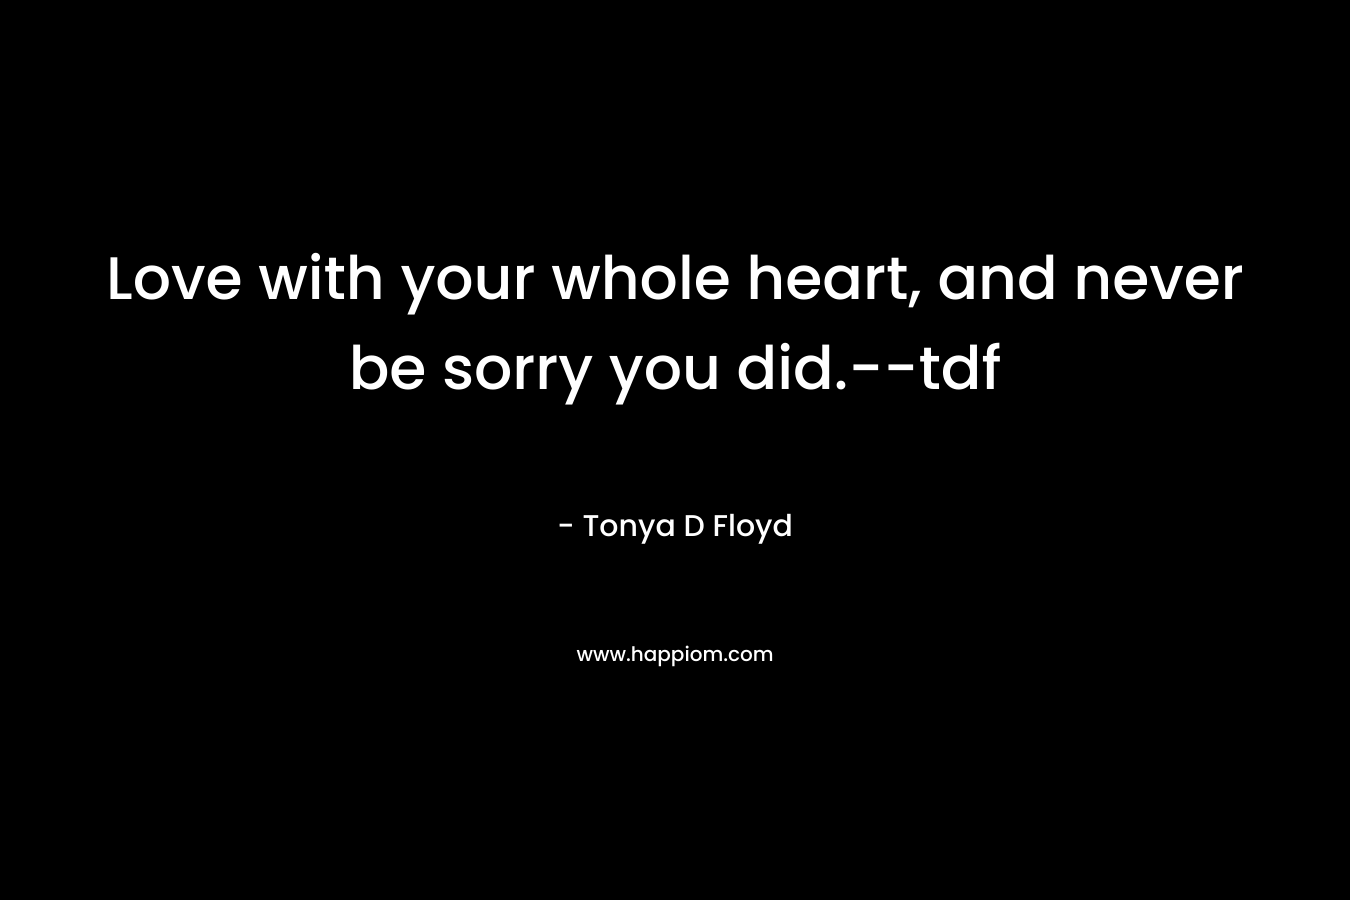 Love with your whole heart, and never be sorry you did.--tdf